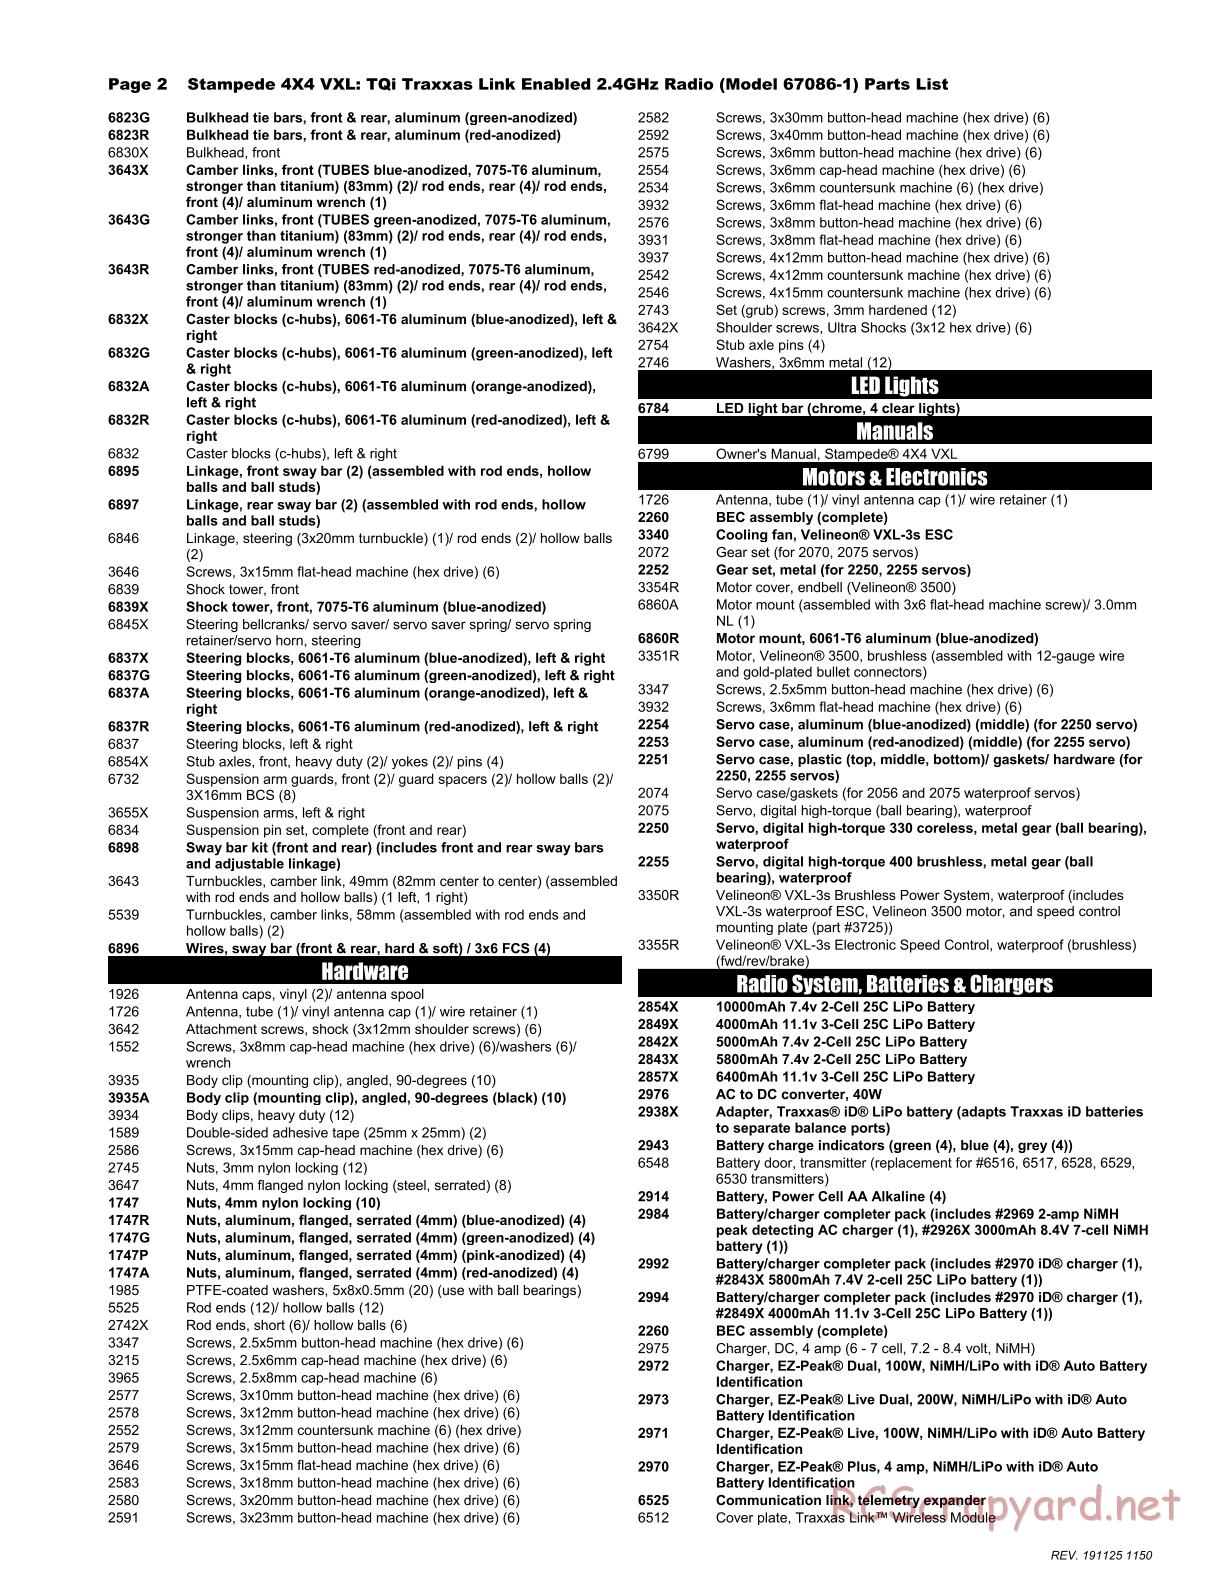 Traxxas - Stampede 4x4 VXL (2015) - Parts List - Page 2